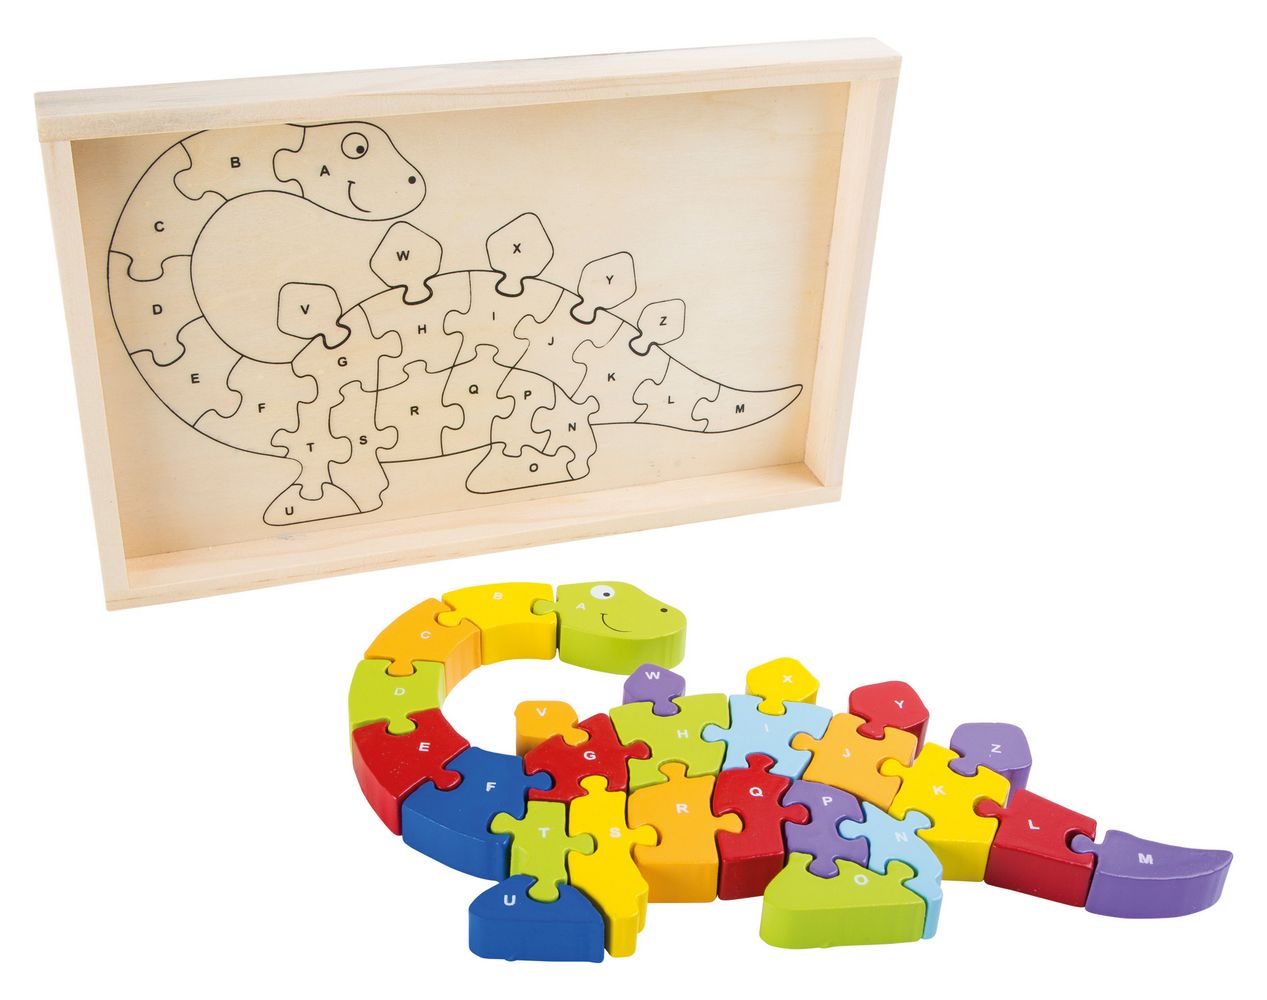 Wooden Abc Puzzle Educate Small Foot Company Educational Game